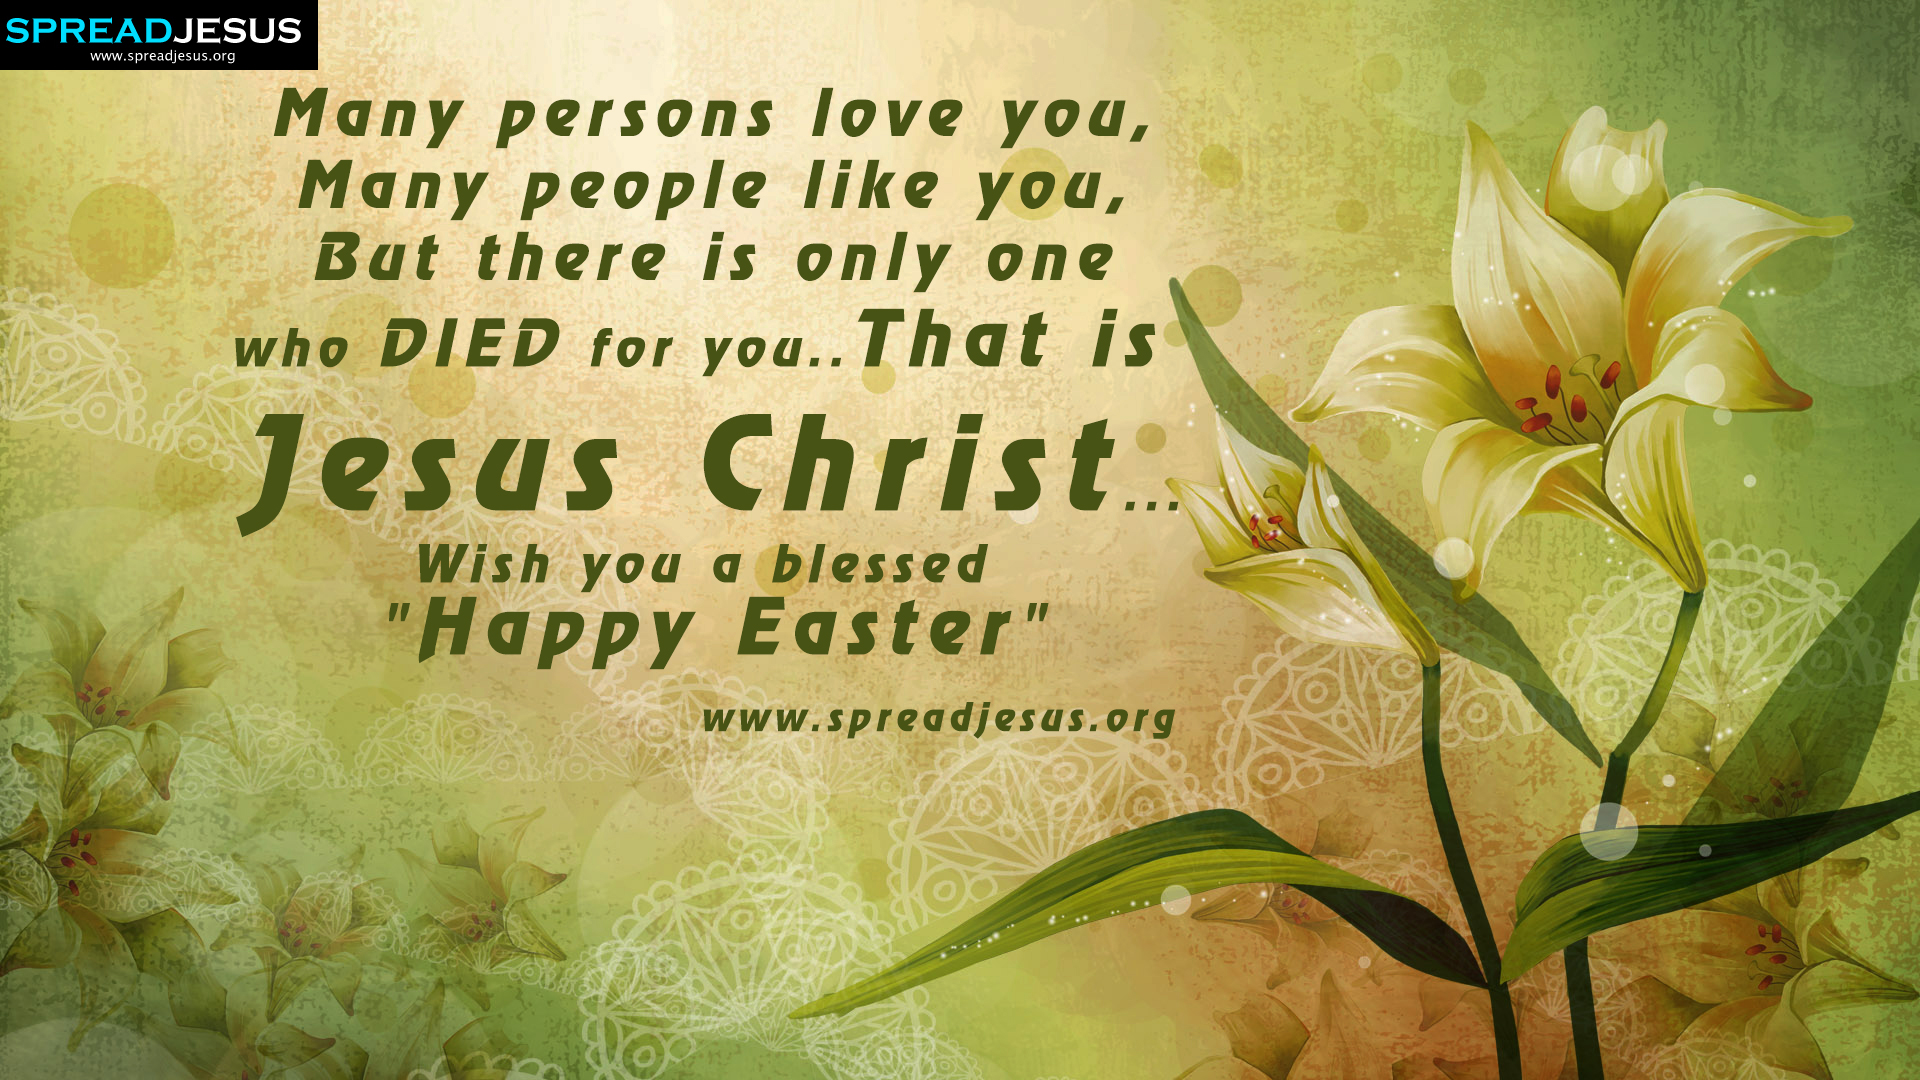 Wish you a blessed Happy Easter EASTER GREETINGS HD WALLPAPERS Many